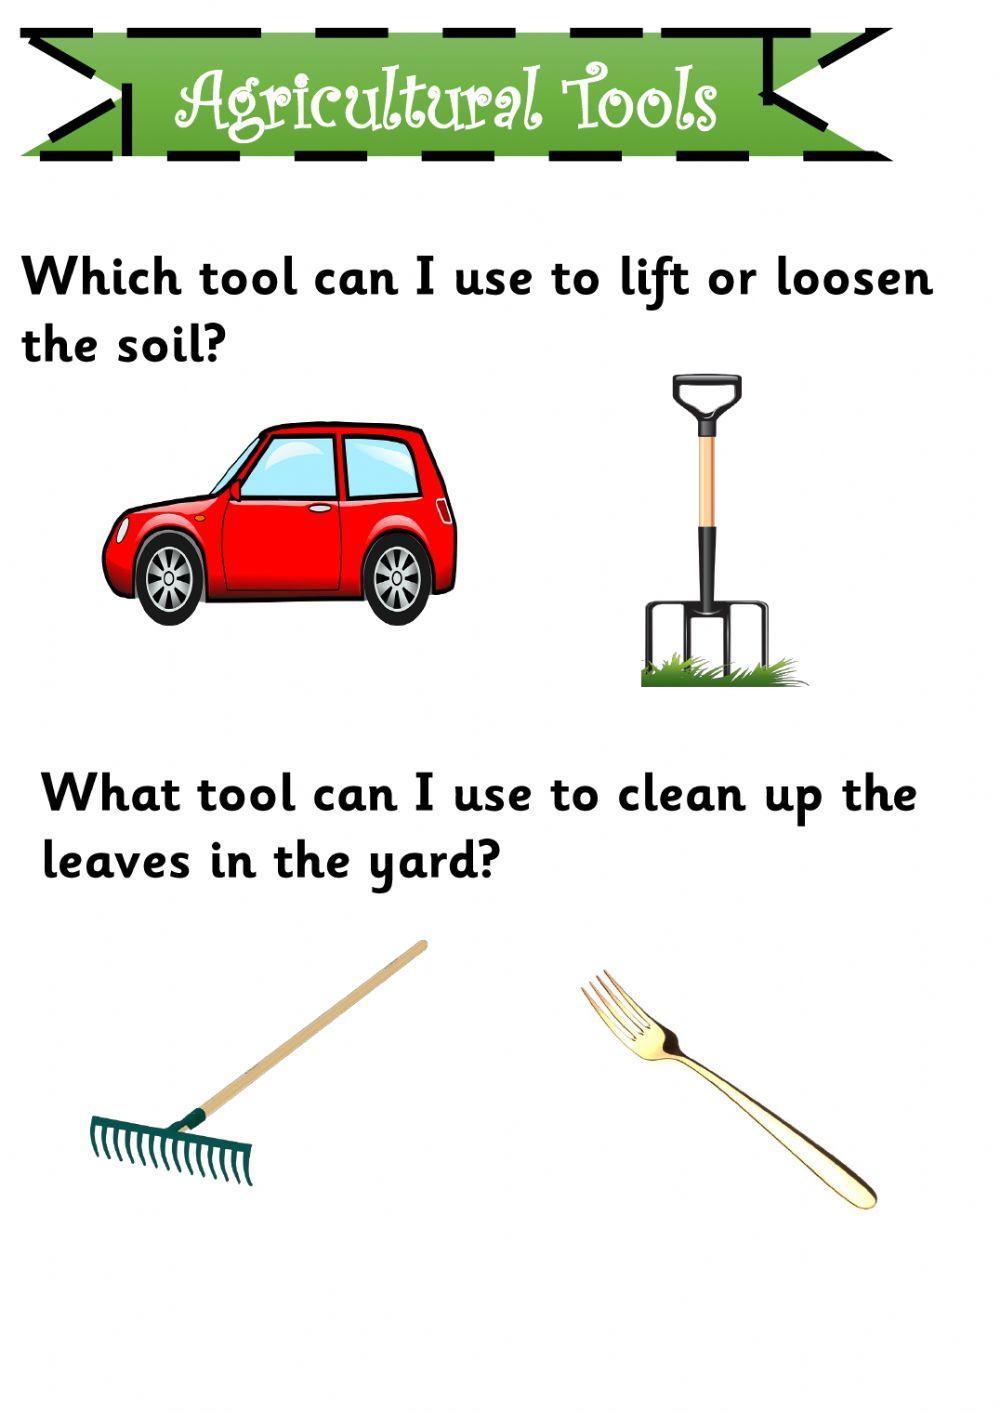 Tools in agriculture